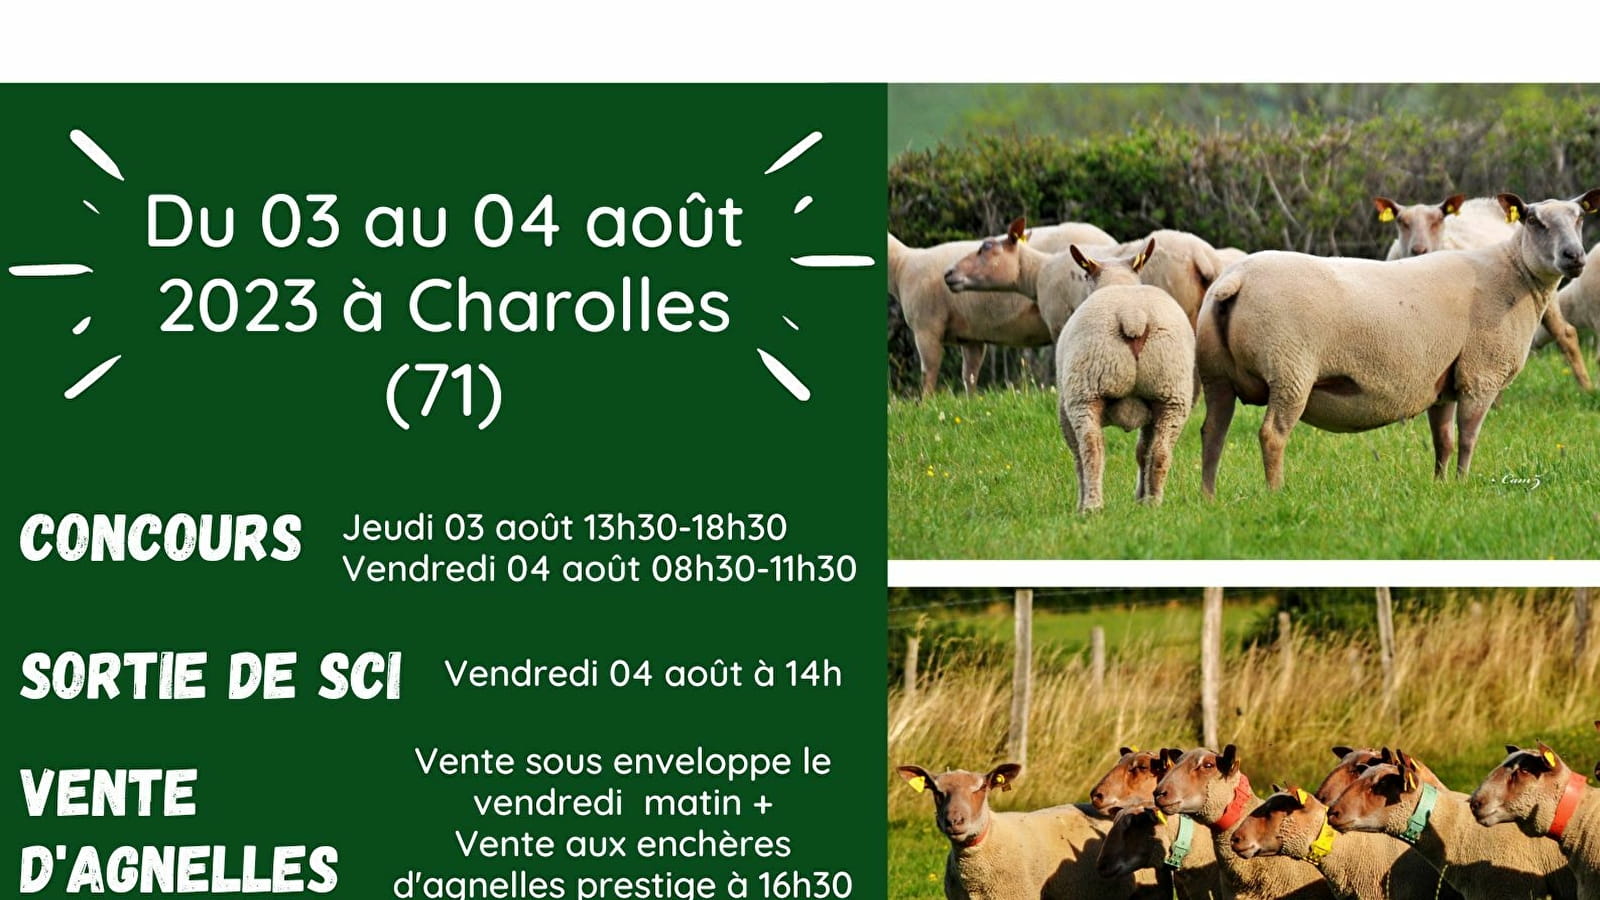 61st National Mouton Charollais Competition